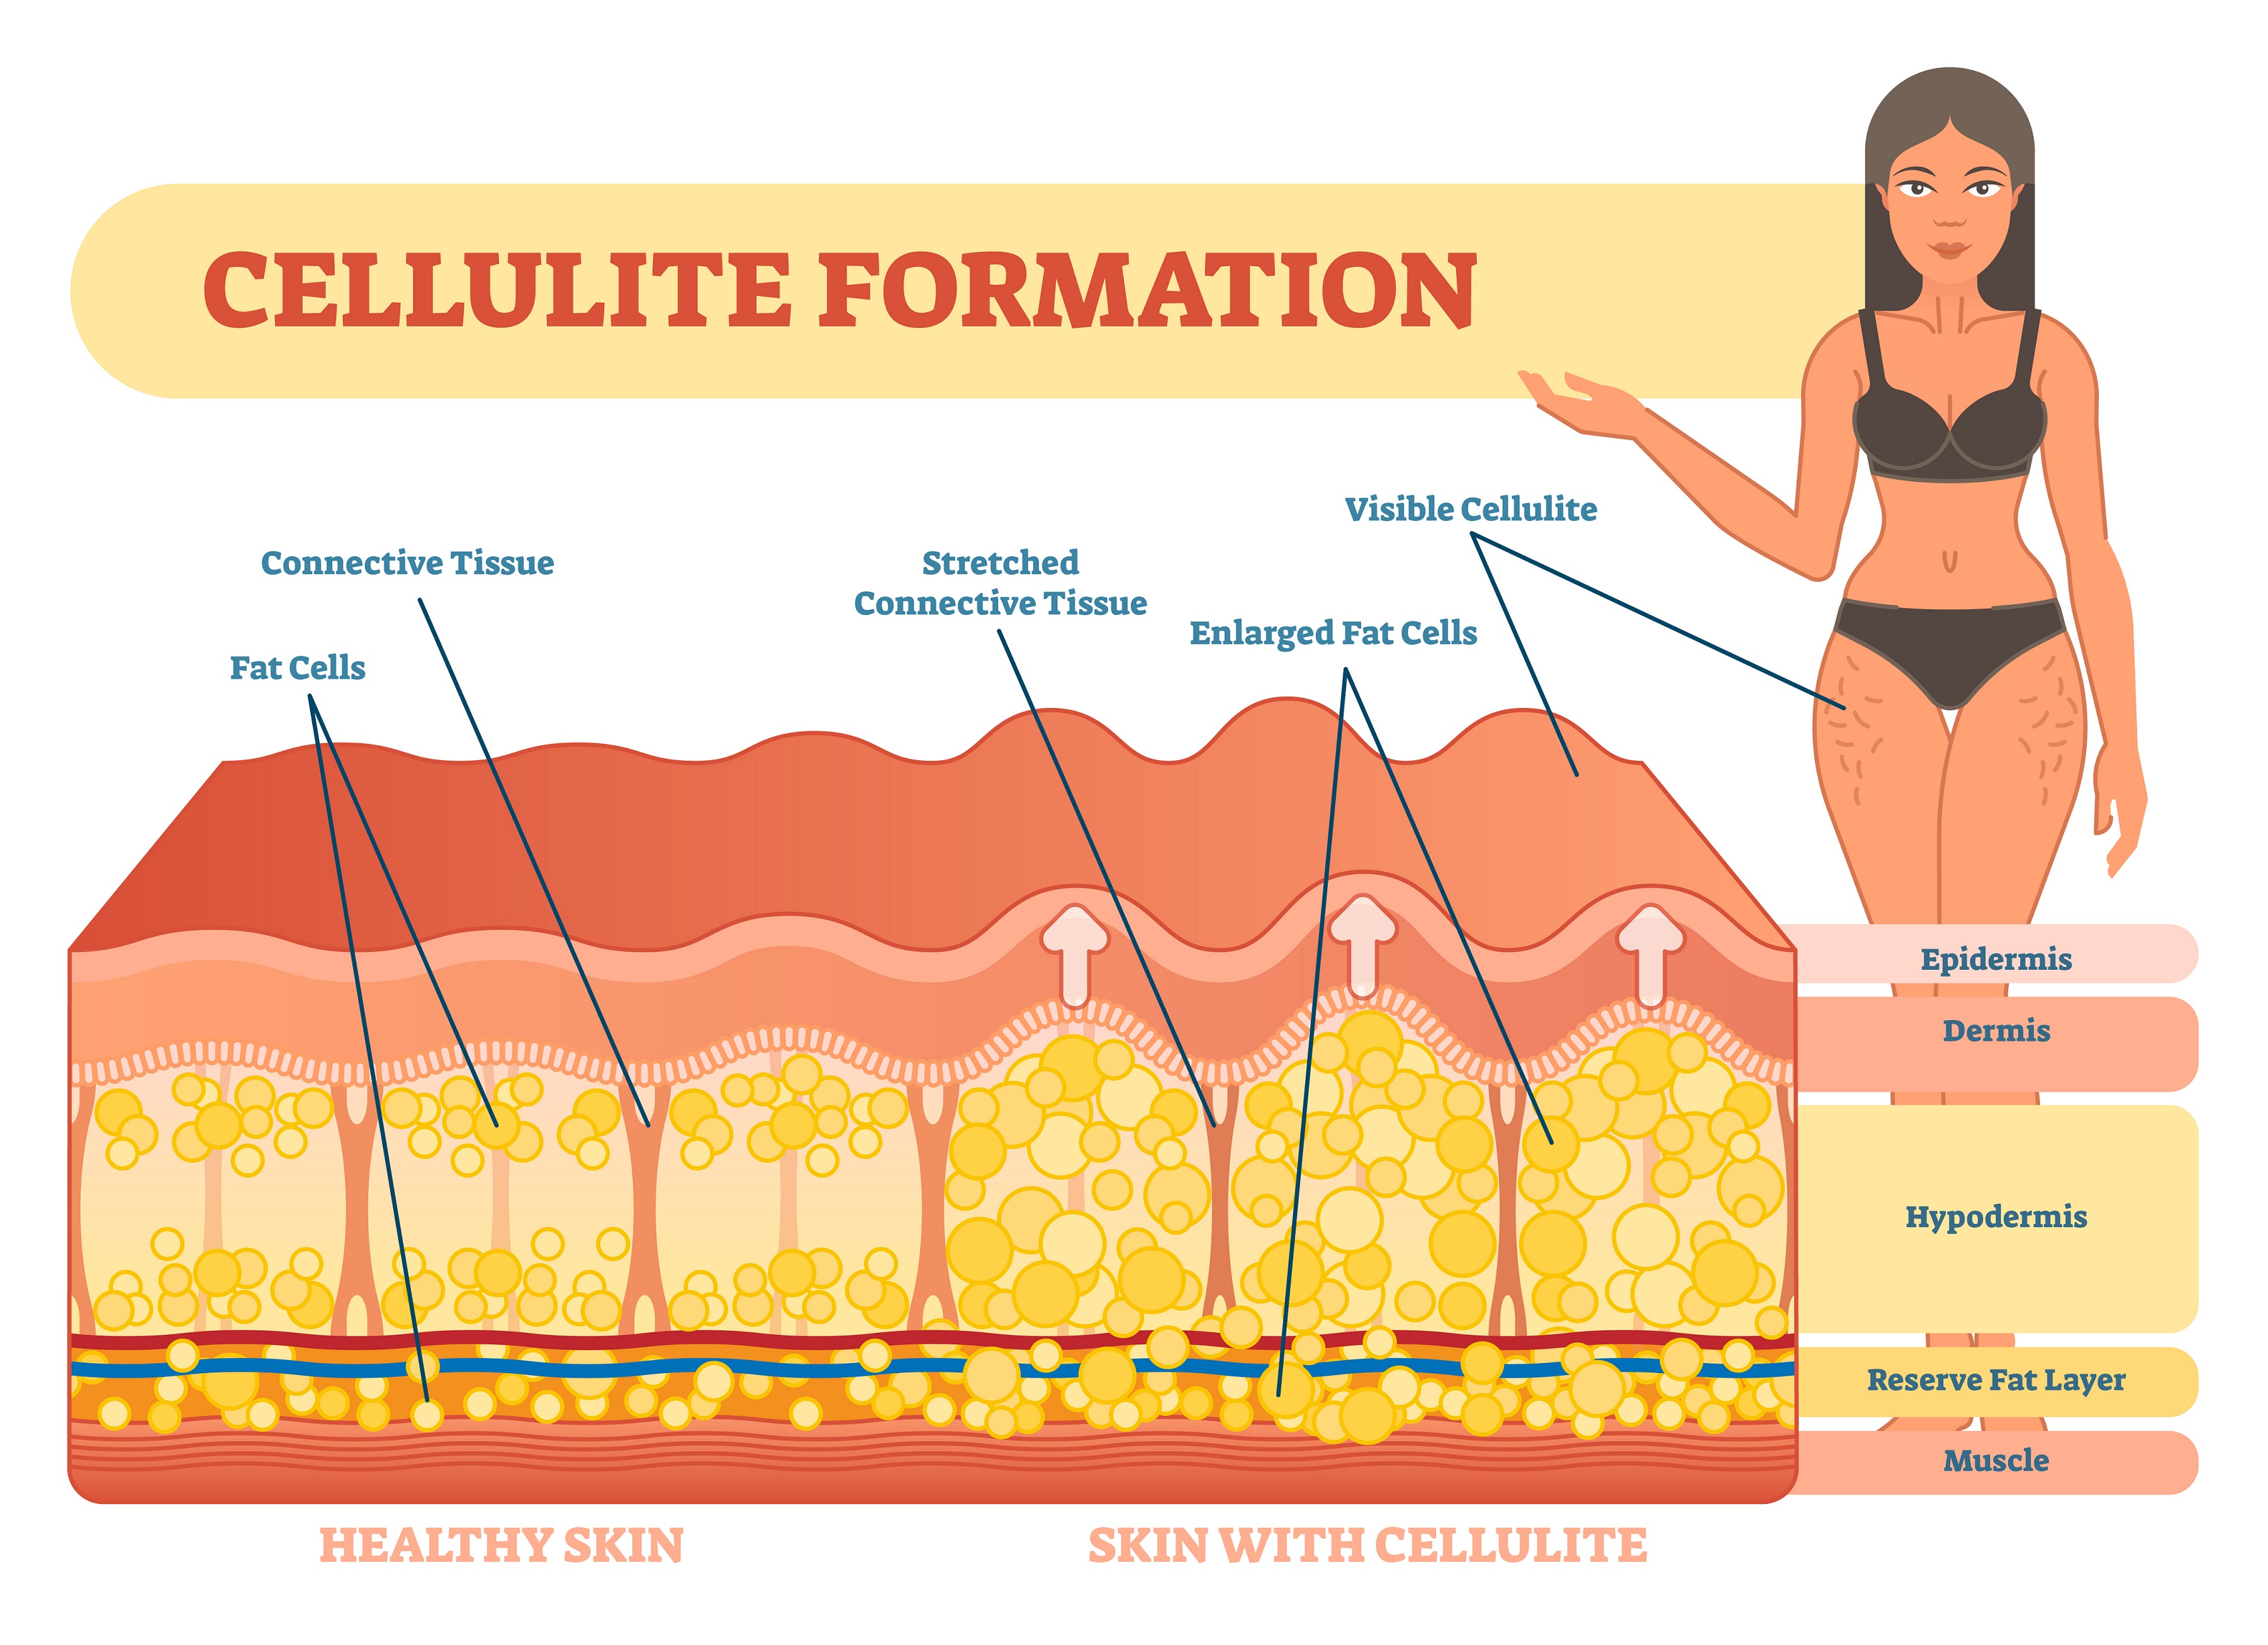 Subcutaneous fat and cellulite